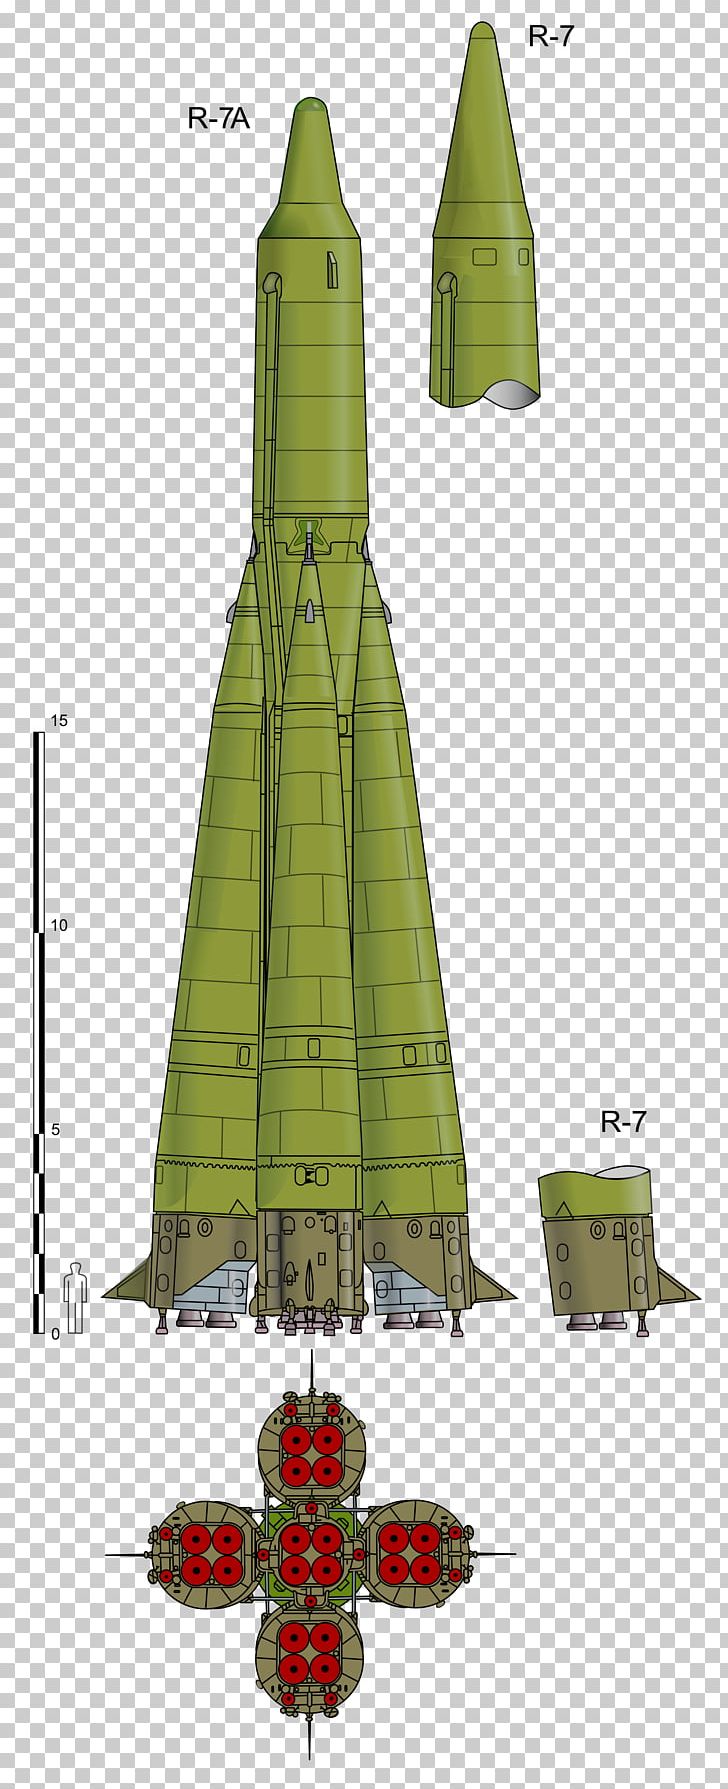 R-7 Semyorka Intercontinental Ballistic Missile Launch Vehicle PNG, Clipart, Ballistic Missile, Intercontinental Ballistic Missile, Launch Vehicle, Luna, Missile Free PNG Download